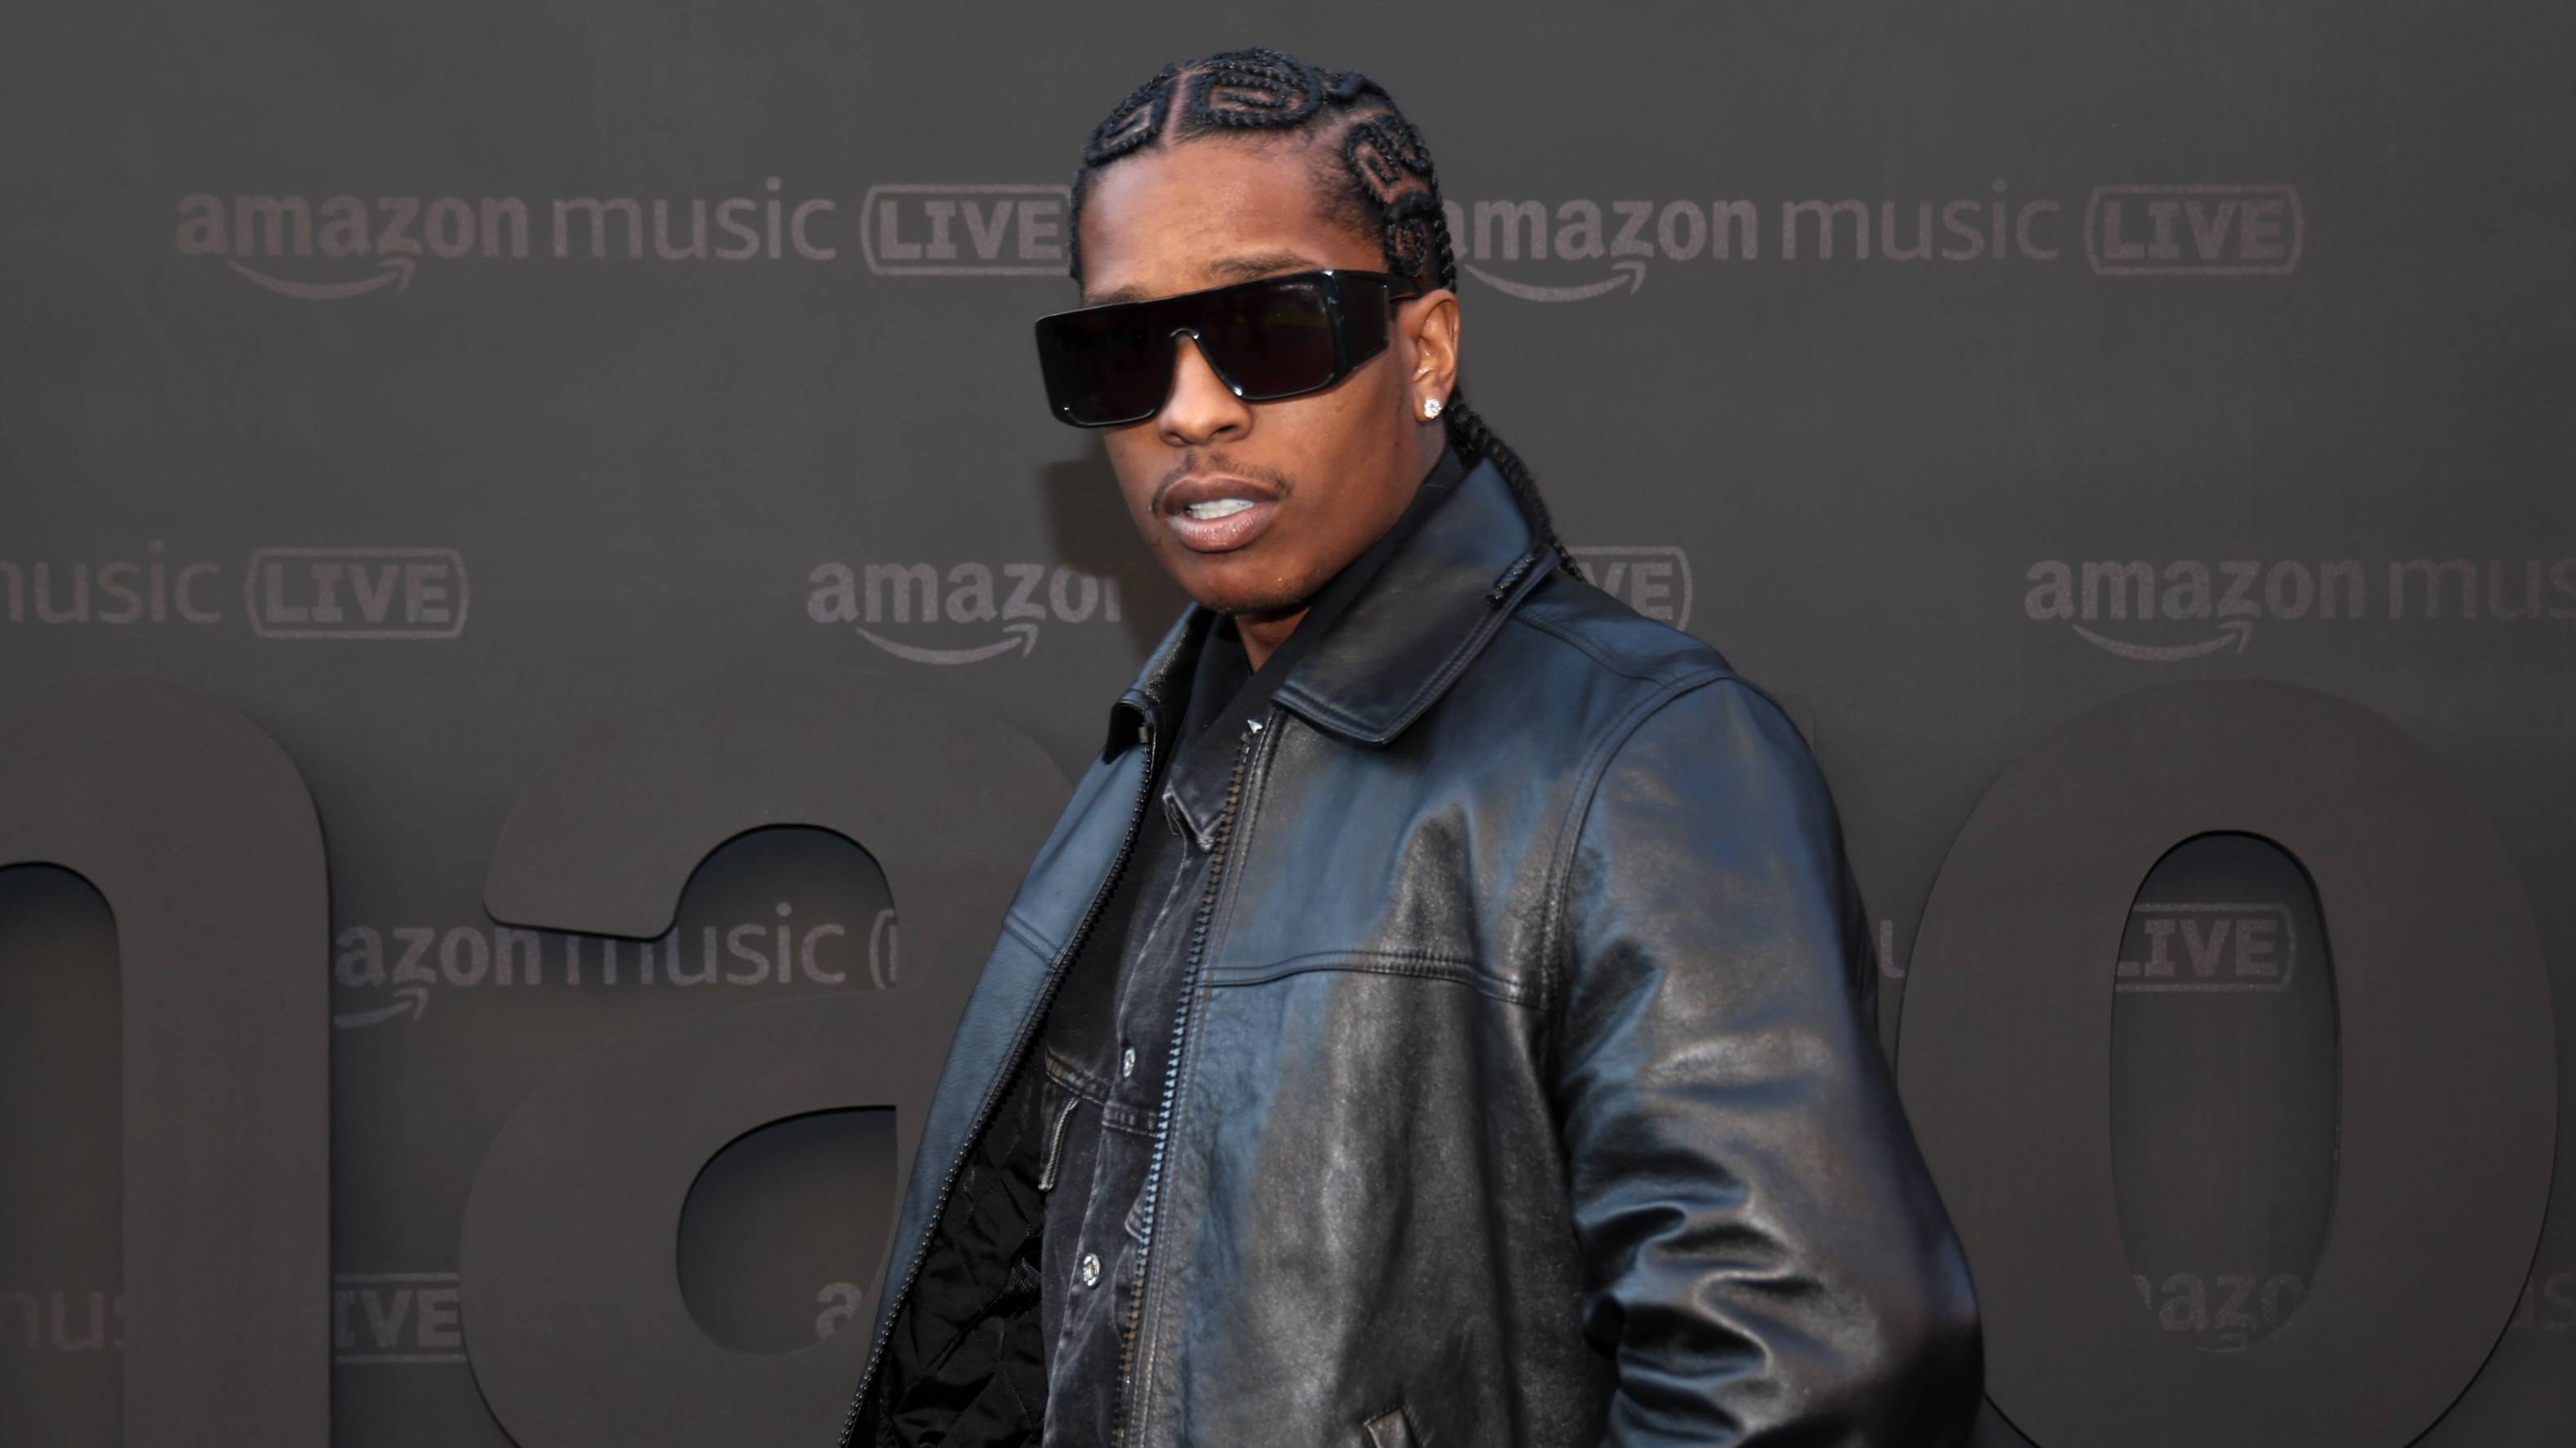 A$AP Rocky attends the Amazon Music Live Concert Series on Dec. 08, 2022 in LA.